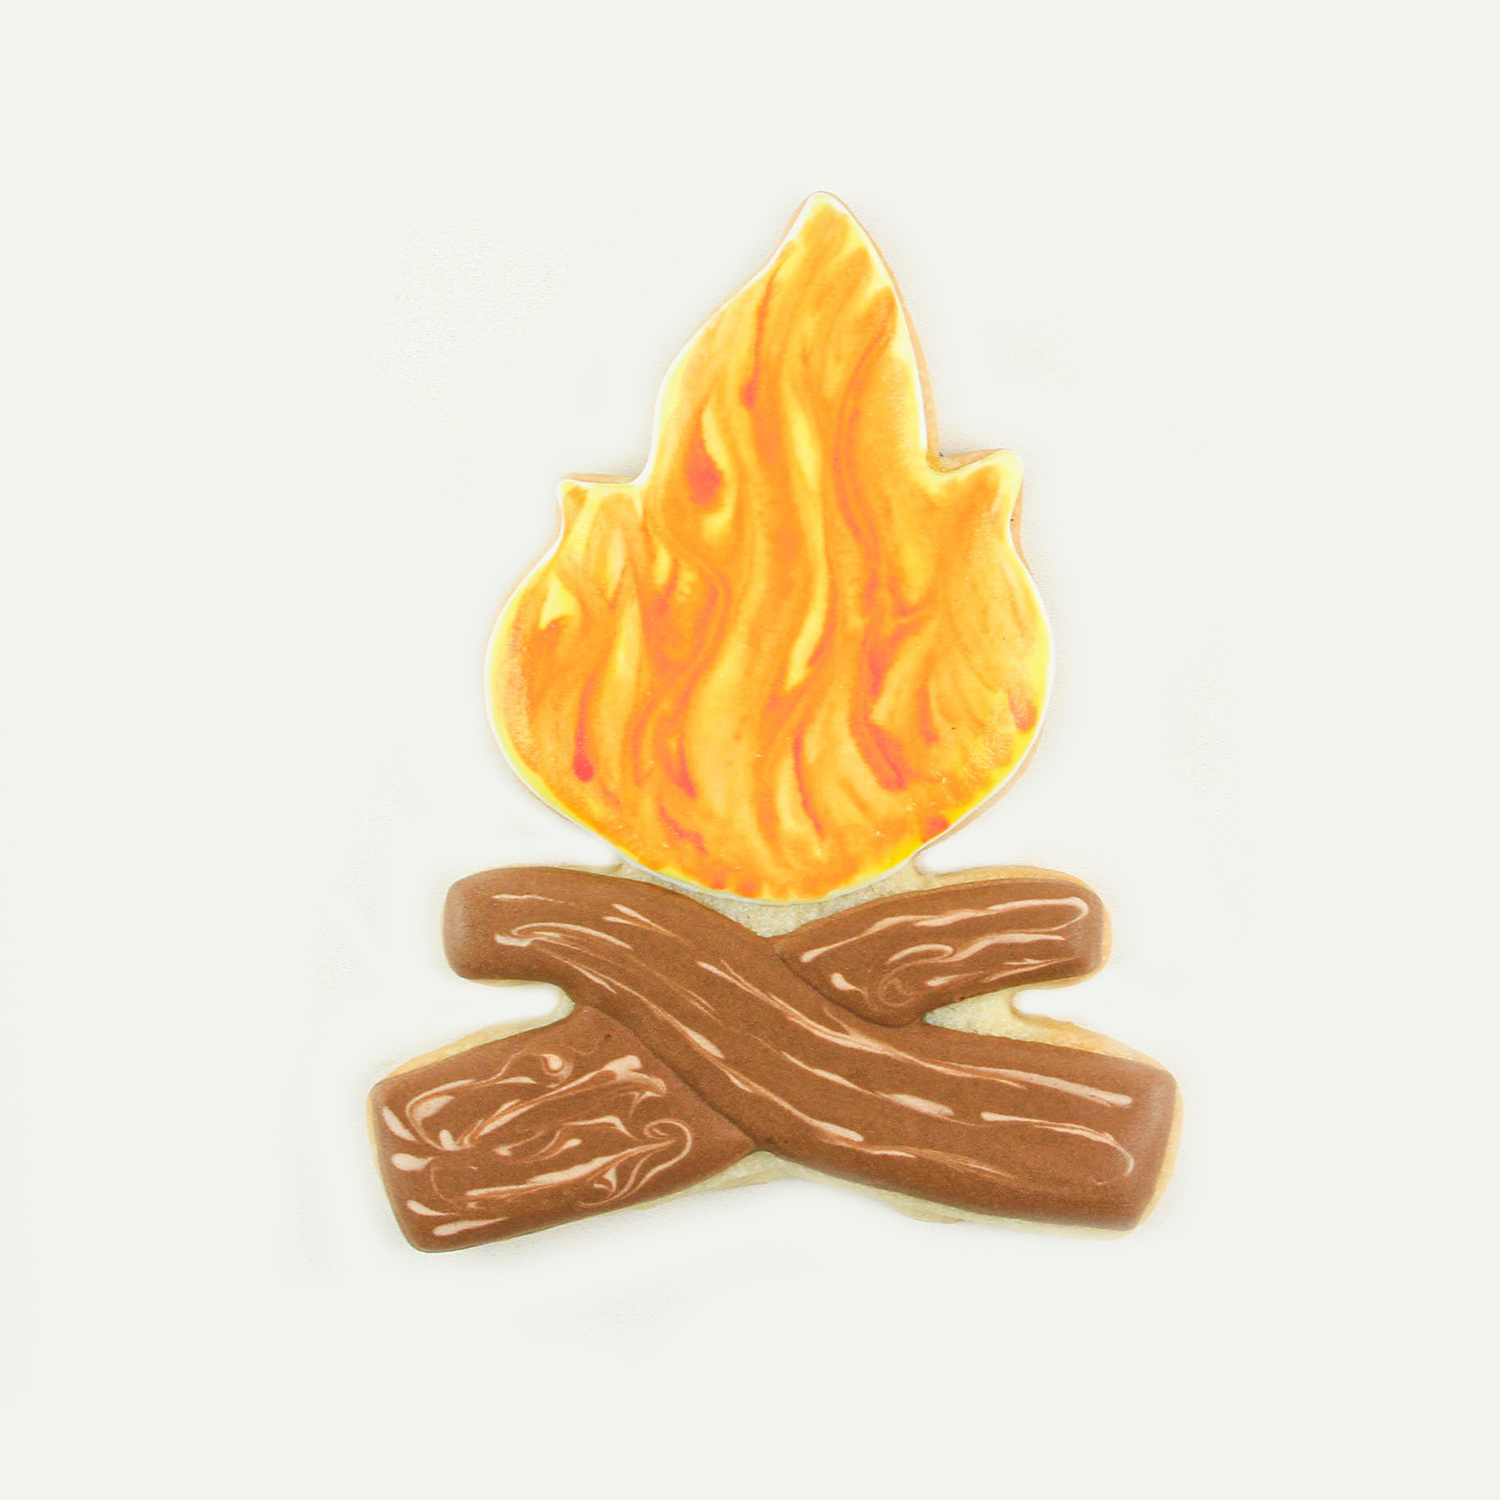 Bon fire cookie decorated in royal icing with brown logs and yellow and orange flames.